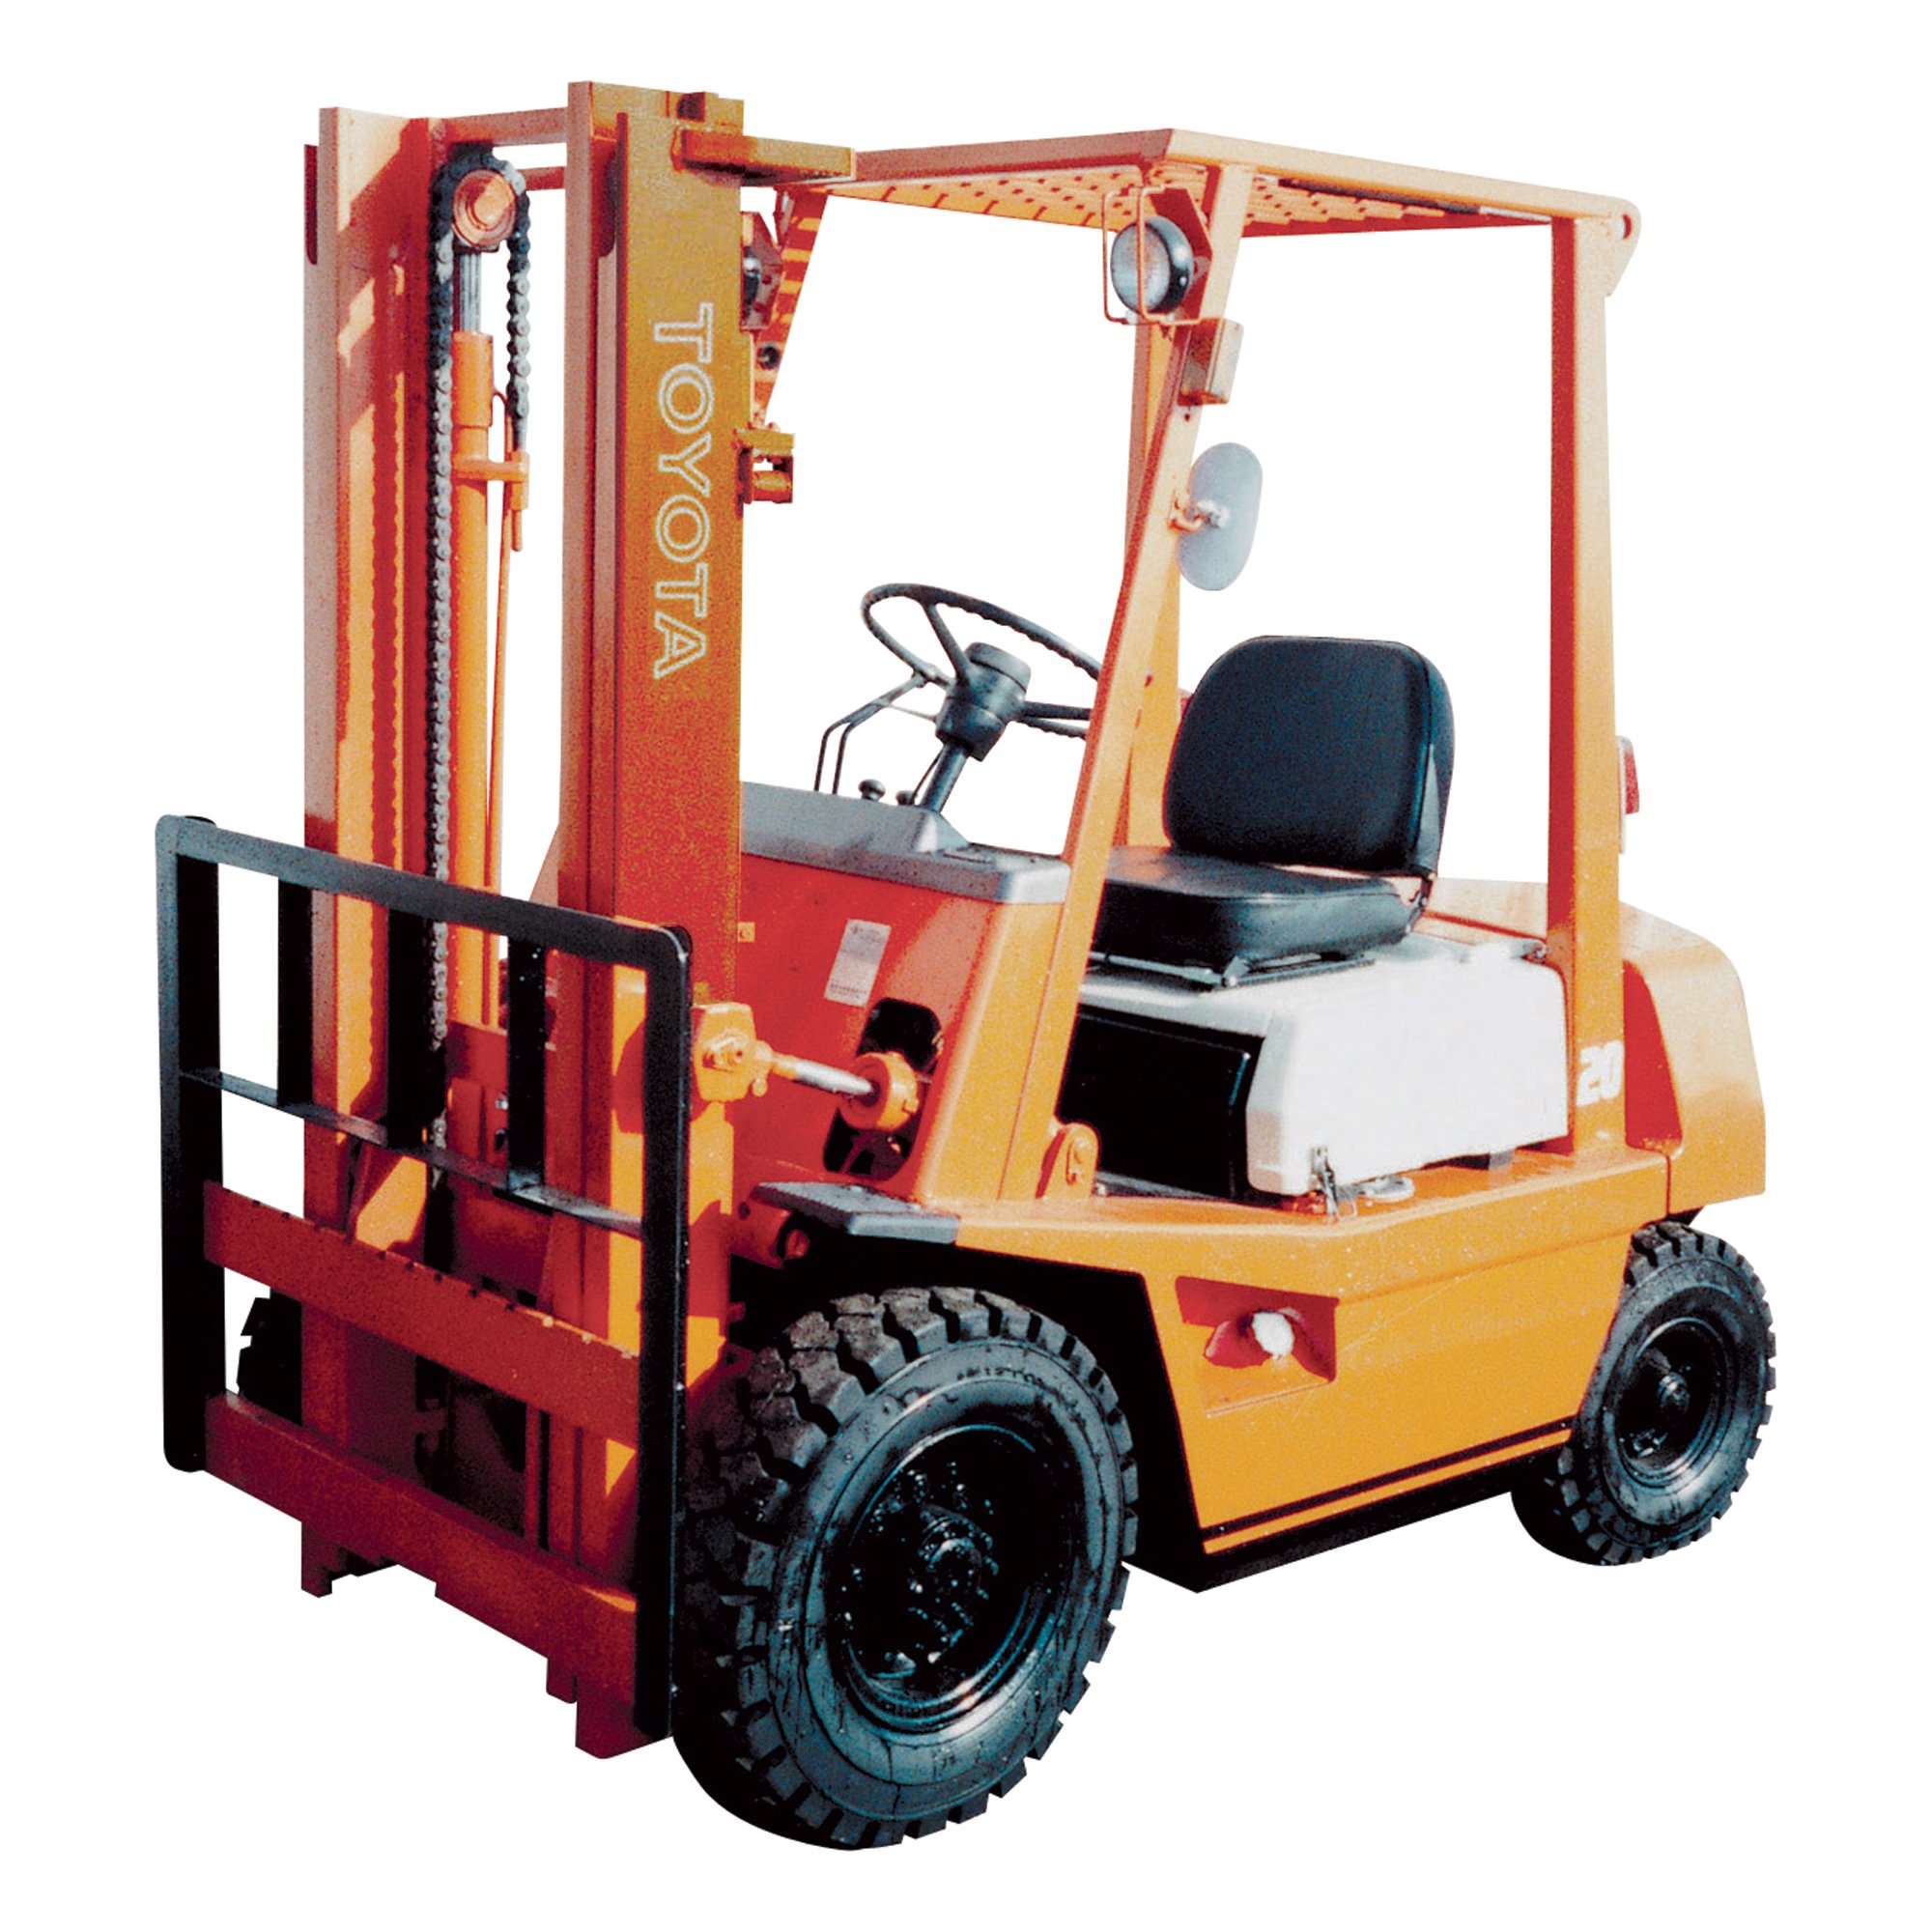 TOYOTA Reconditioned Forklift — 3 Stage with Side Shift, 6,000-lb 